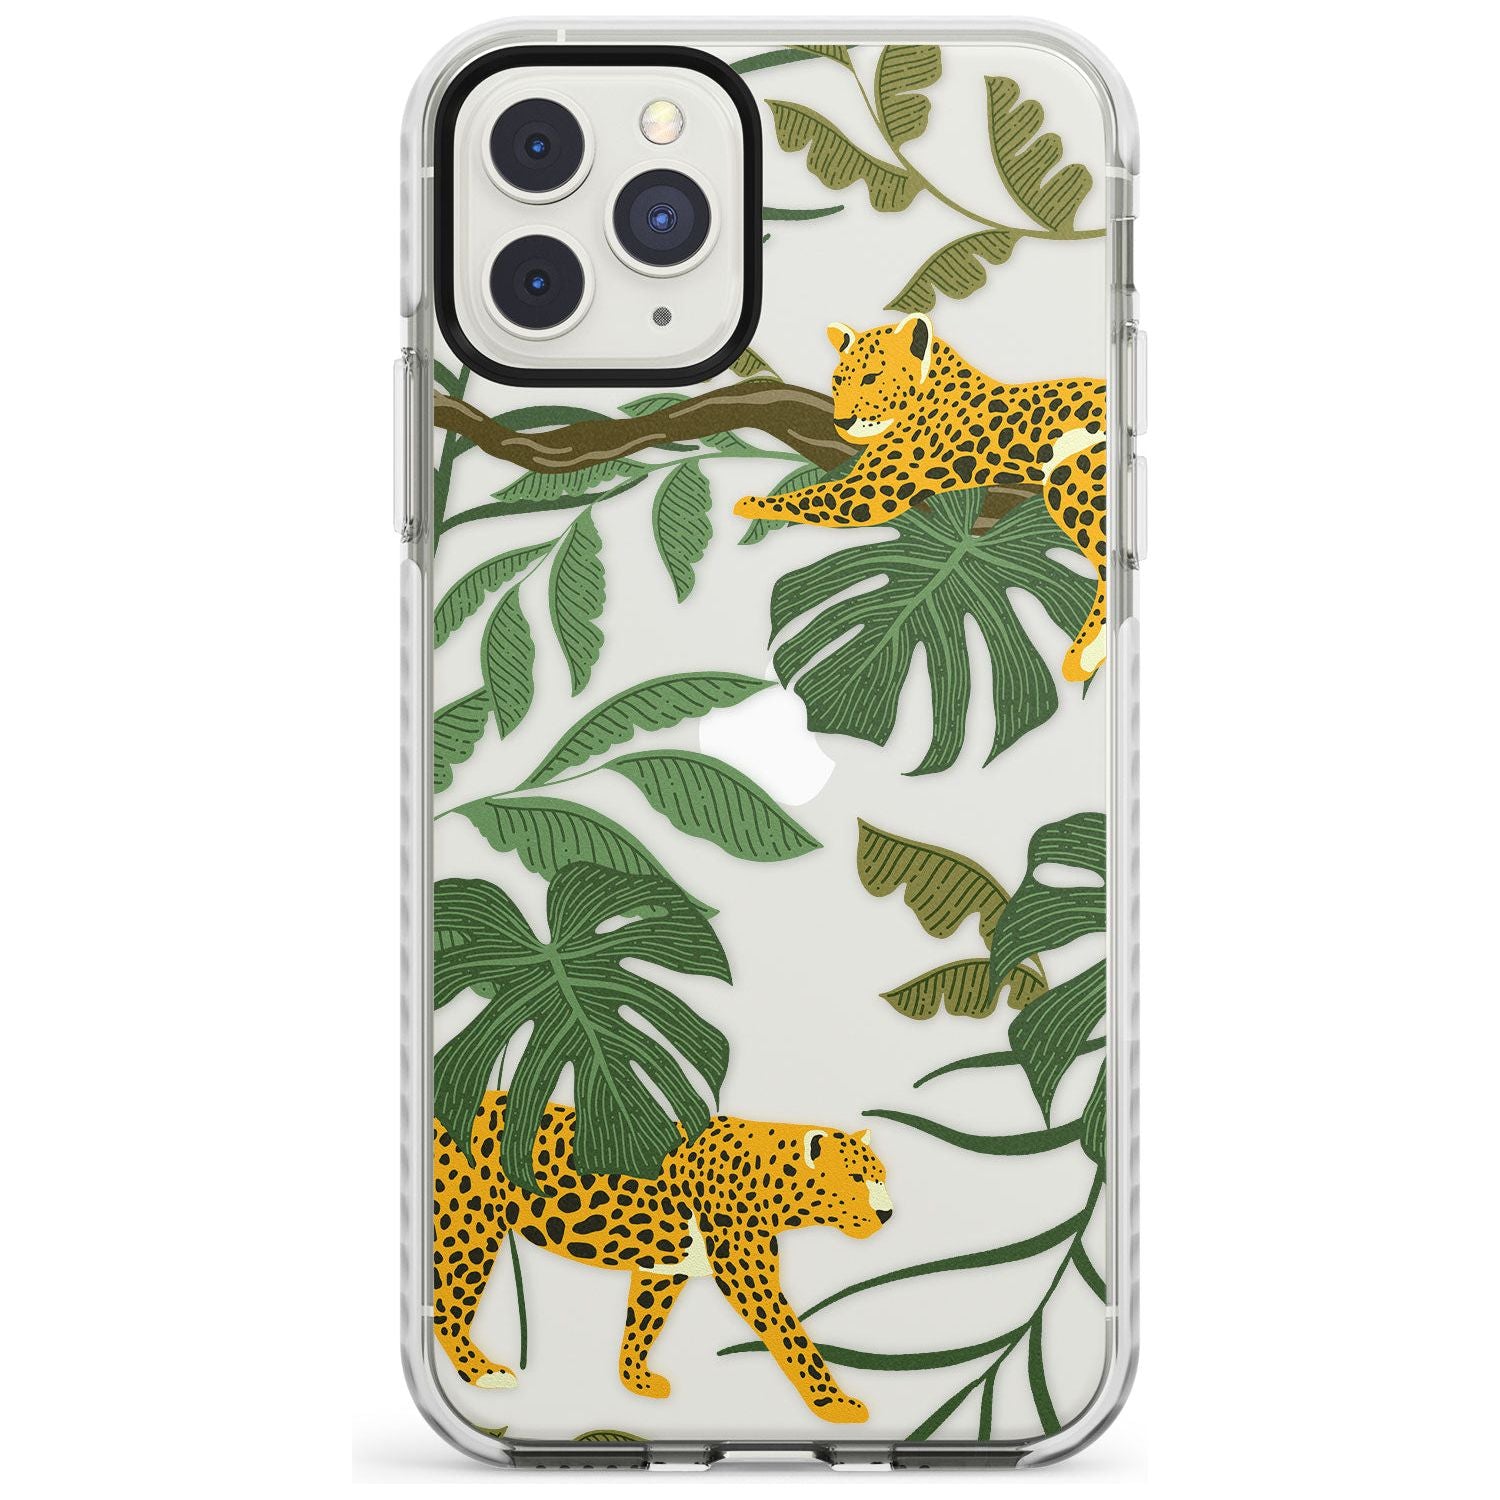 Two Jaguars & Foliage Jungle Cat Pattern Impact Phone Case for iPhone 11 Pro Max